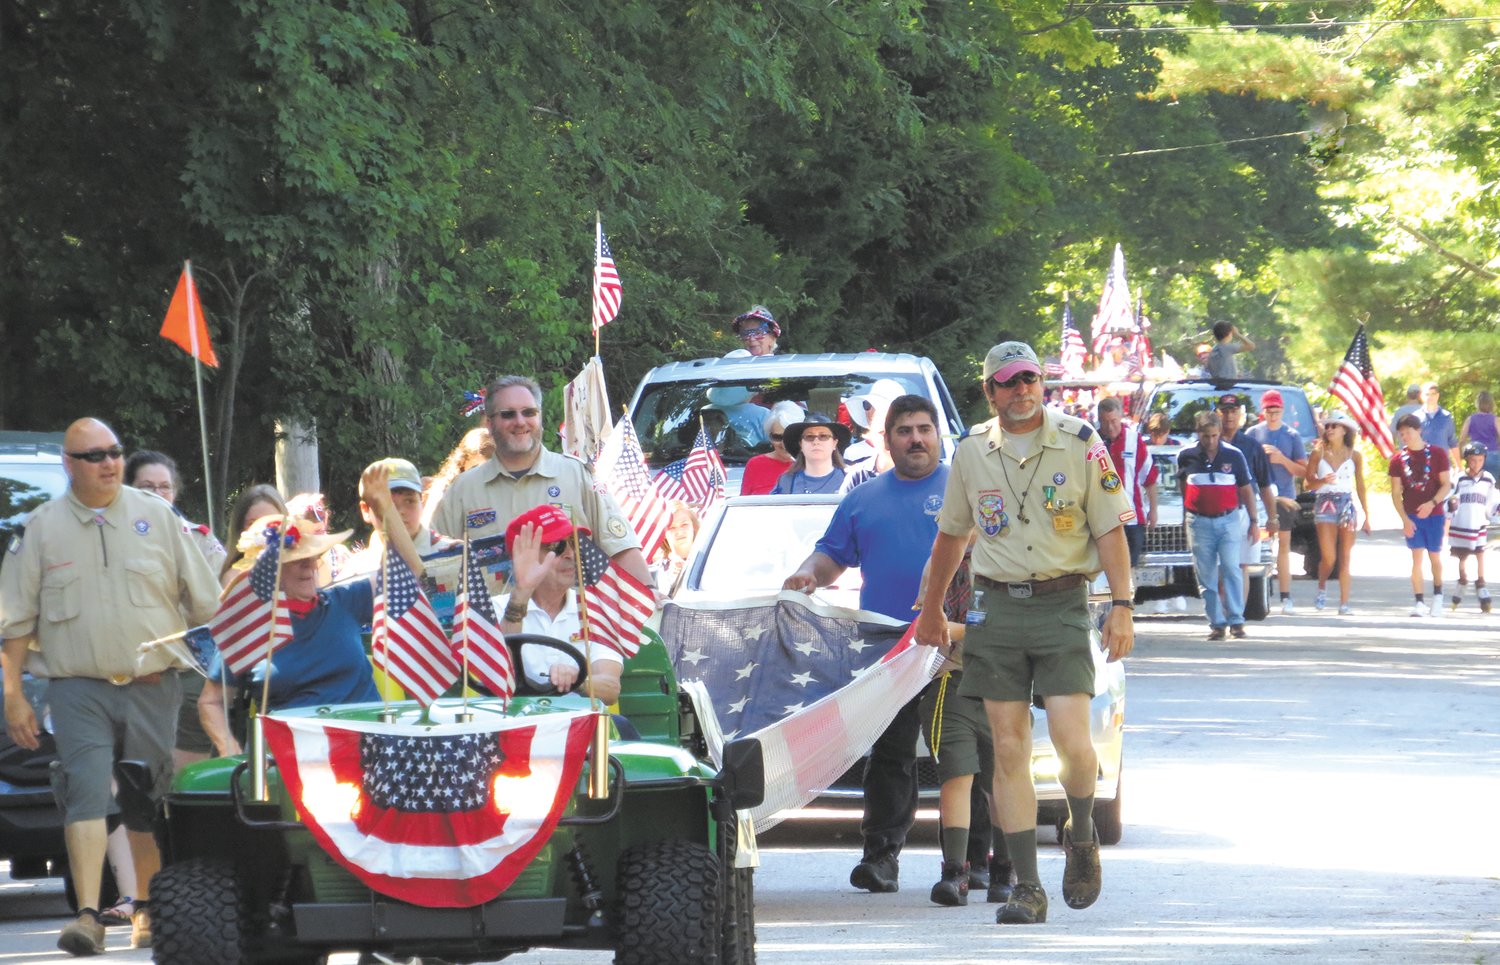 Started 27 years ago, the Warwick Neck Fourth of July parade has become a neighborhood classic that brings out the red, white and blue and lots of decorated vehicles – even lawn mowers. Susan Dzyacky, who has done so much for the Neck over the years, was this year’s Grand Marshal.  More photos are featured on page 6. (Warwick Beacon photos by Kathy Eisemann)